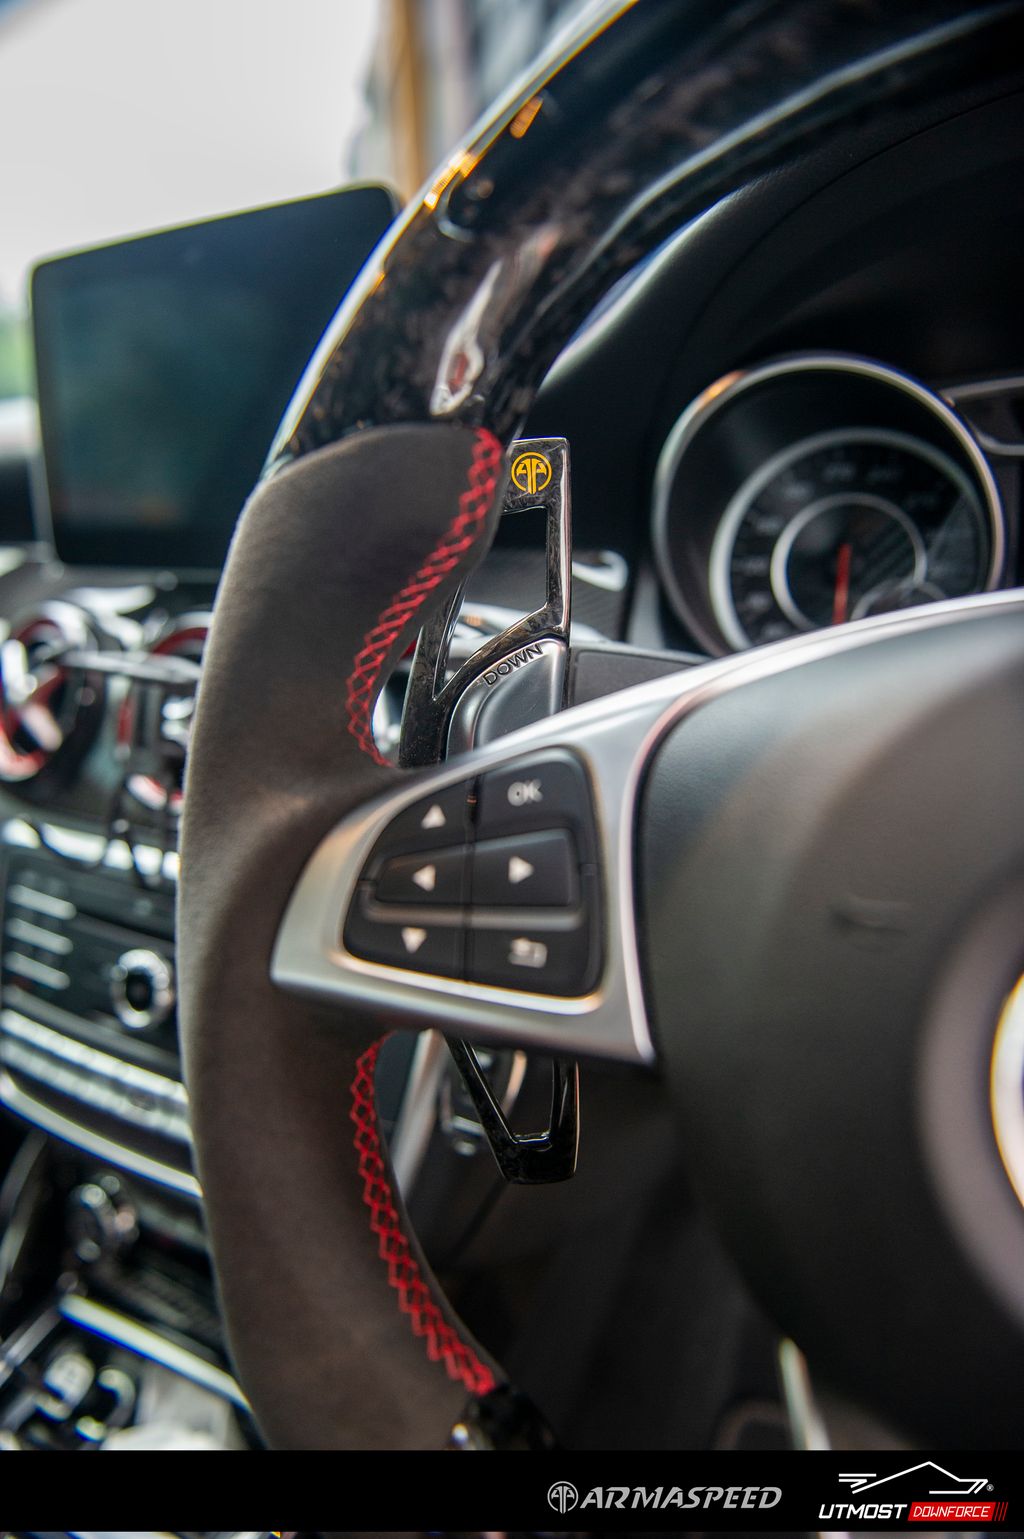 MASTER your Mercedes PADDLE SHIFTERS! 